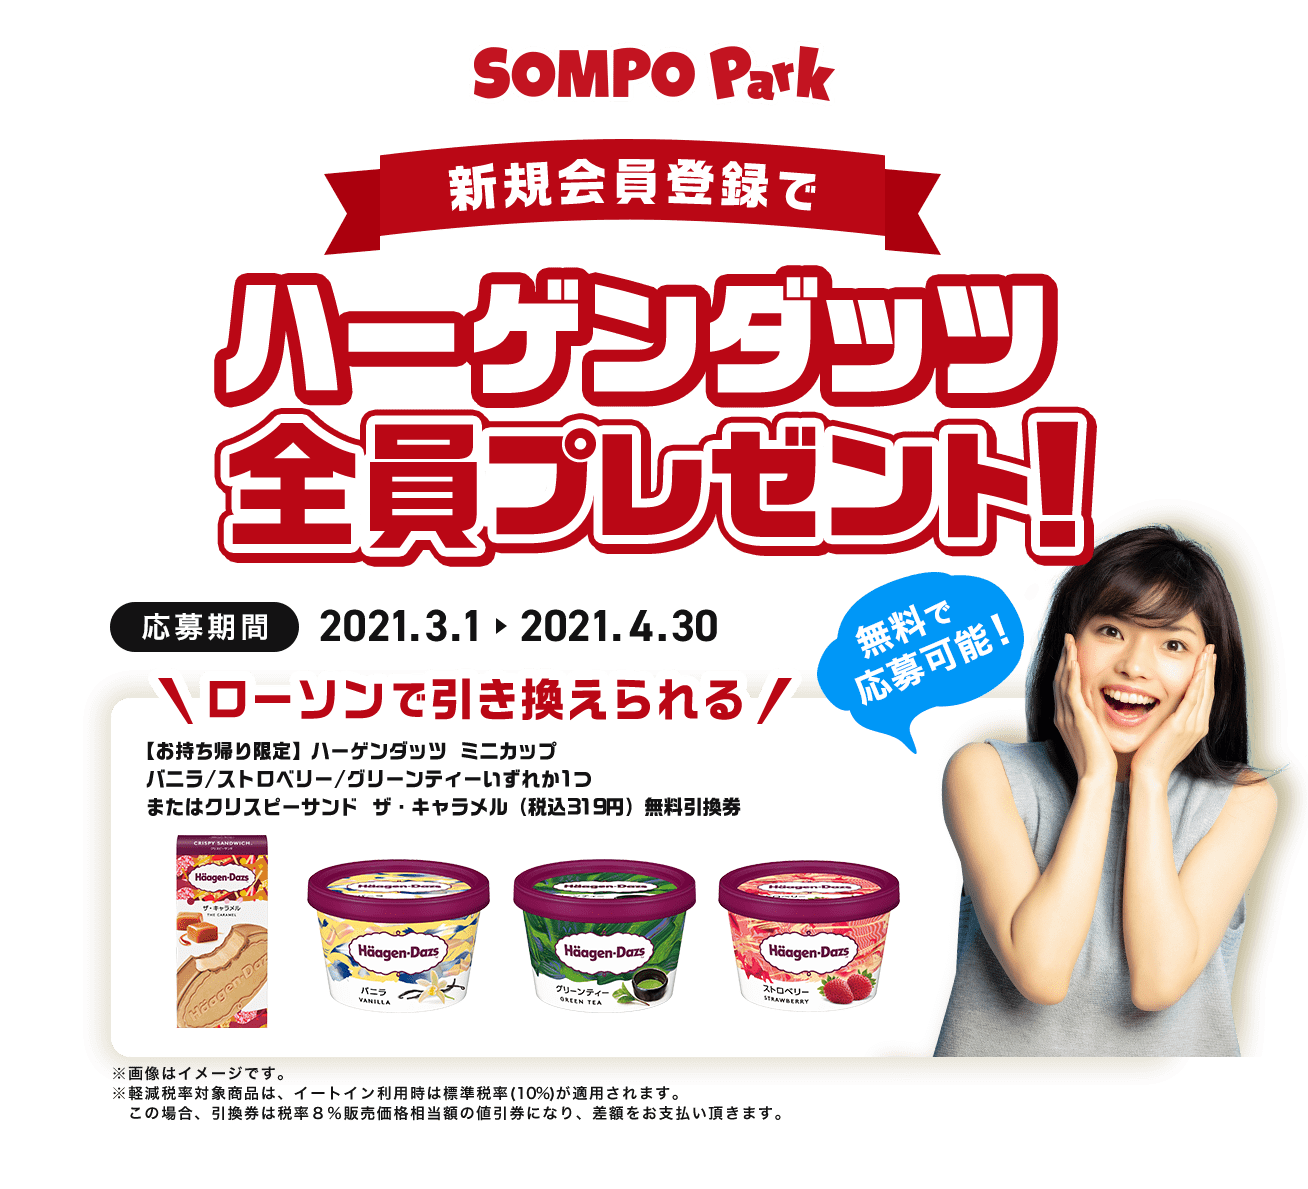 SOMPO Park 新規会員登録でハーゲンダッツ全員プレゼント！